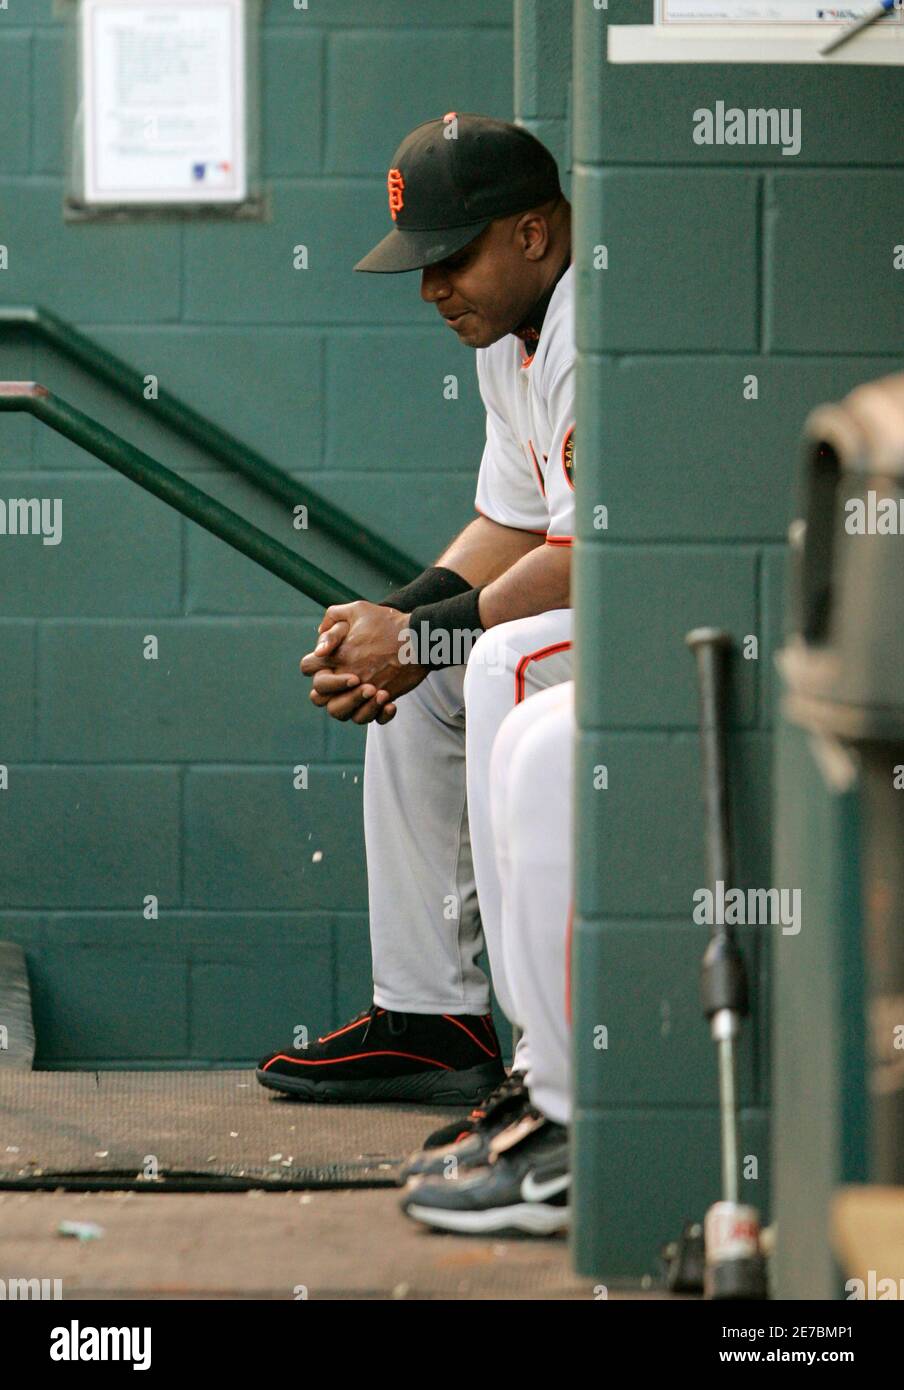 San Francisco Giants Barry Bonds sits in the dugout during the 1st inning of National League baseball action against Houston Astros in Houston, May 17, 2006. Bonds was not in the lineup for the game. REUTERS/Rick Wilking Stock Photo